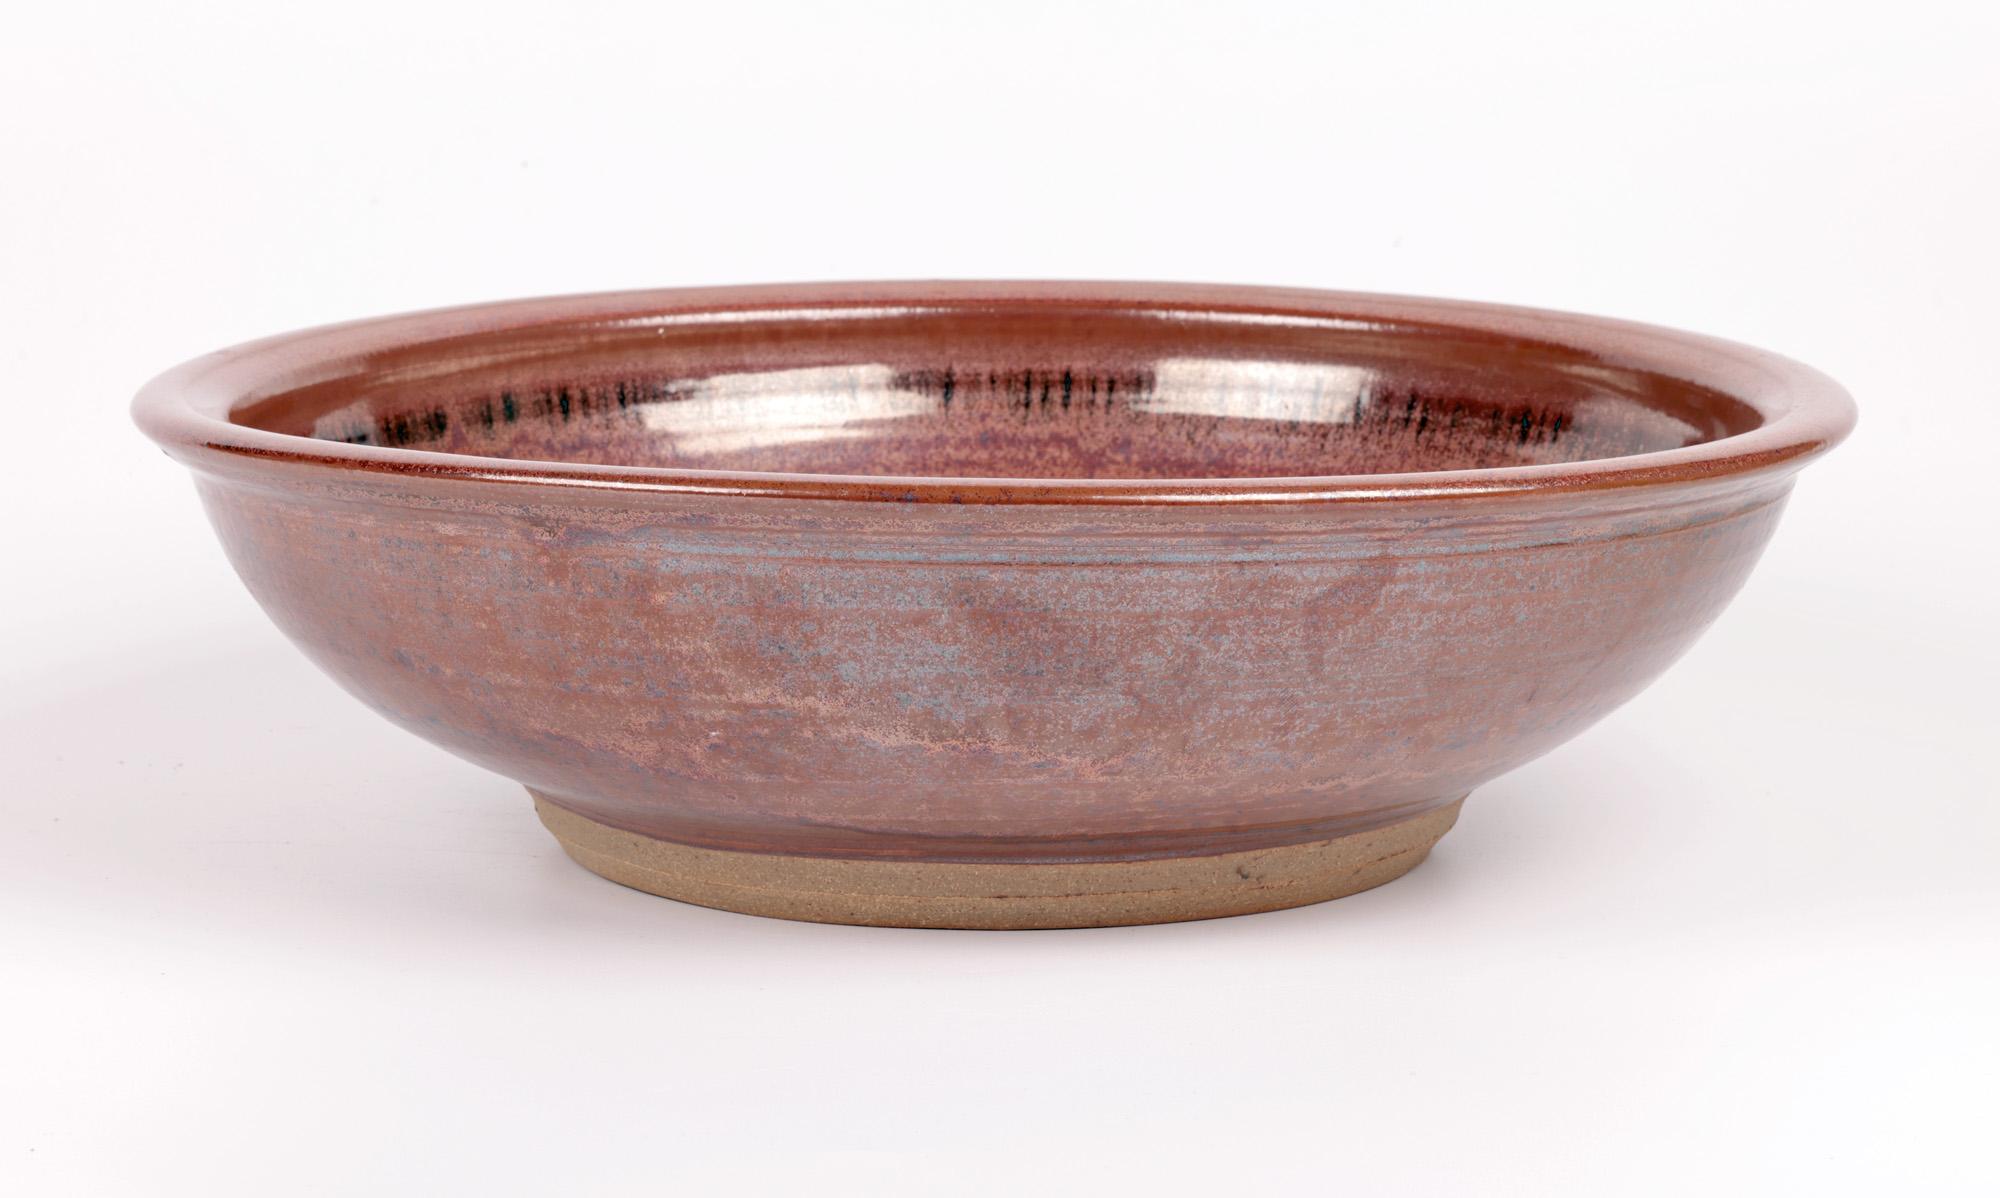 A large and impressive Winchcombe studio pottery bowl with slip trailed patterning and copper glazes attributed to Ray Finch and dating from the latter 20th century. The hand thrown bowl is heavily made and stands raised on a narrow unglazed round